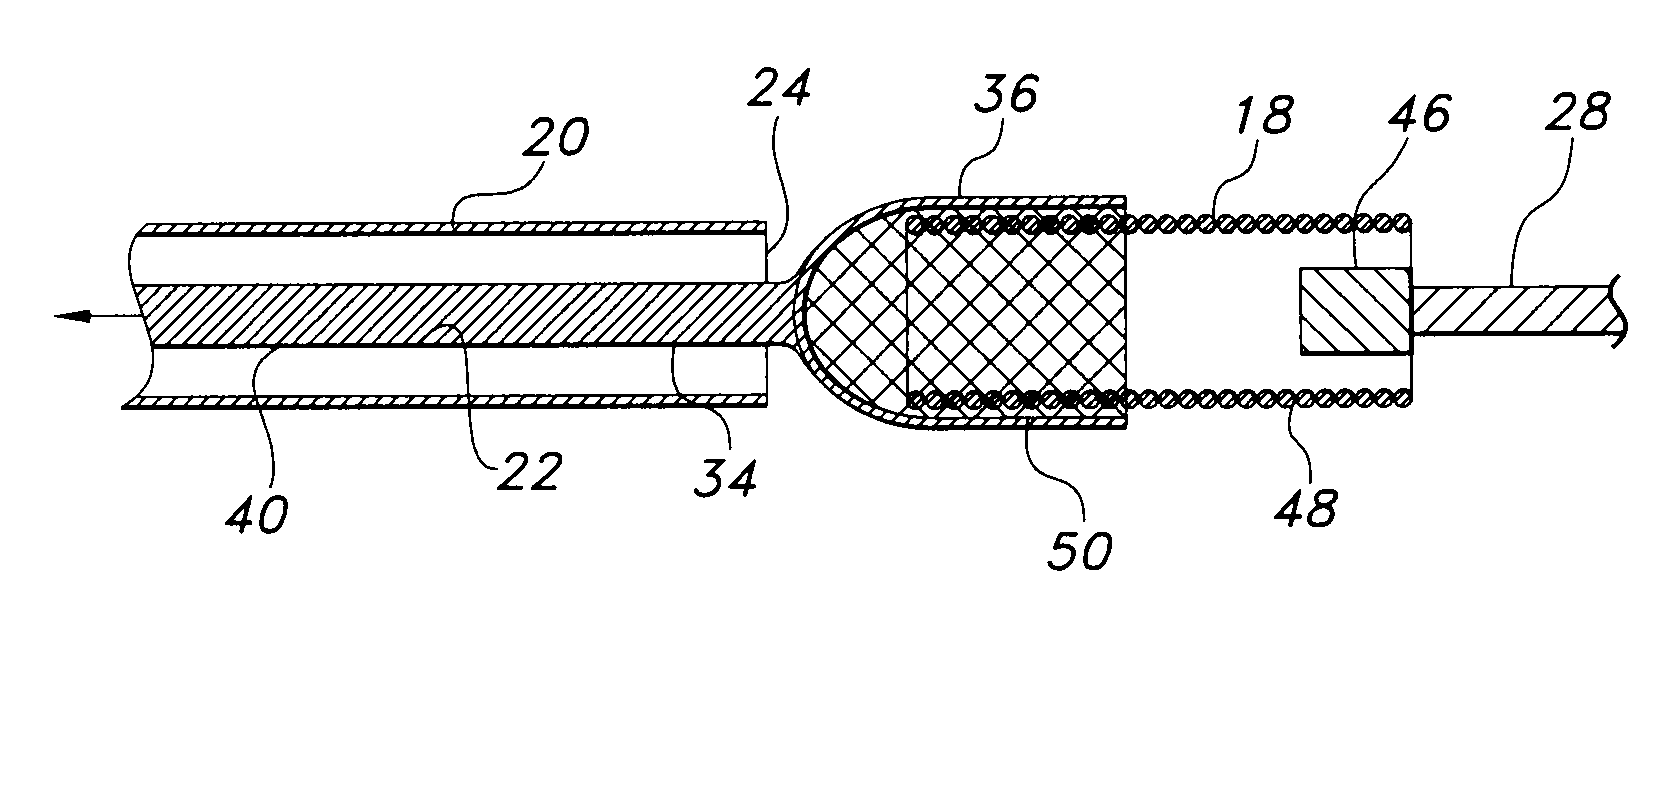 Prosthesis loading delivery and deployment apparatus